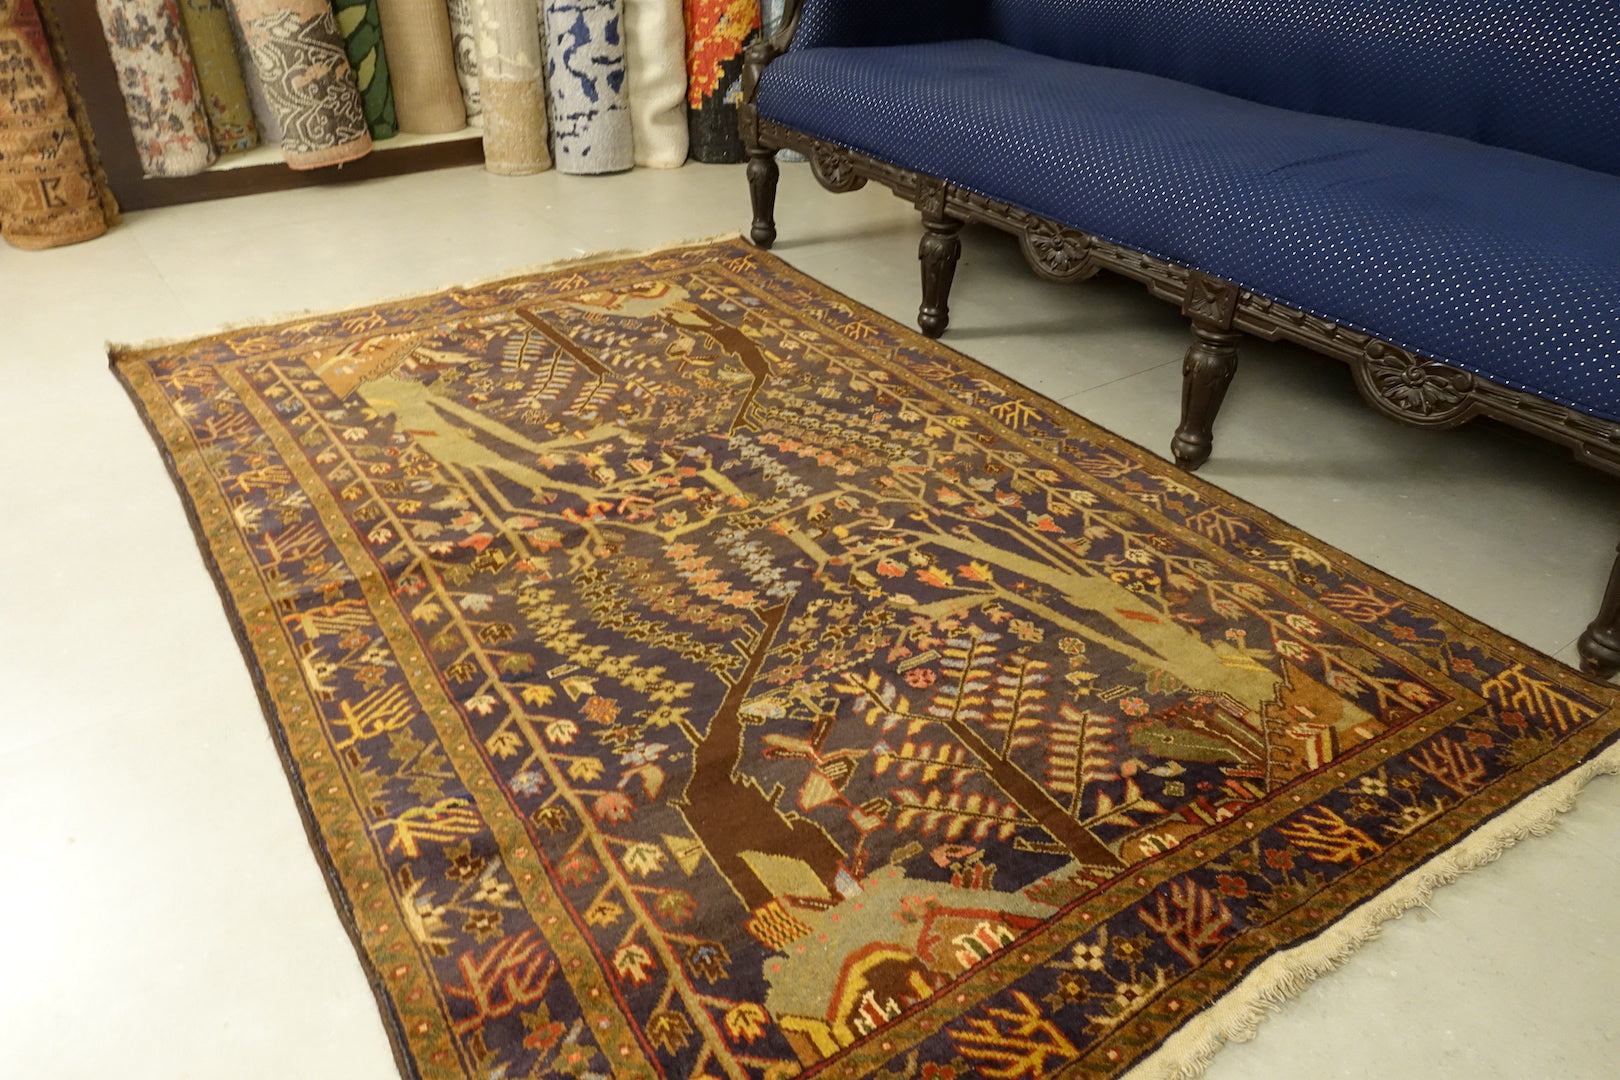 A 4 by 6 feet balochi rug. The colours primarily include beige, brick, rust, blue and green.